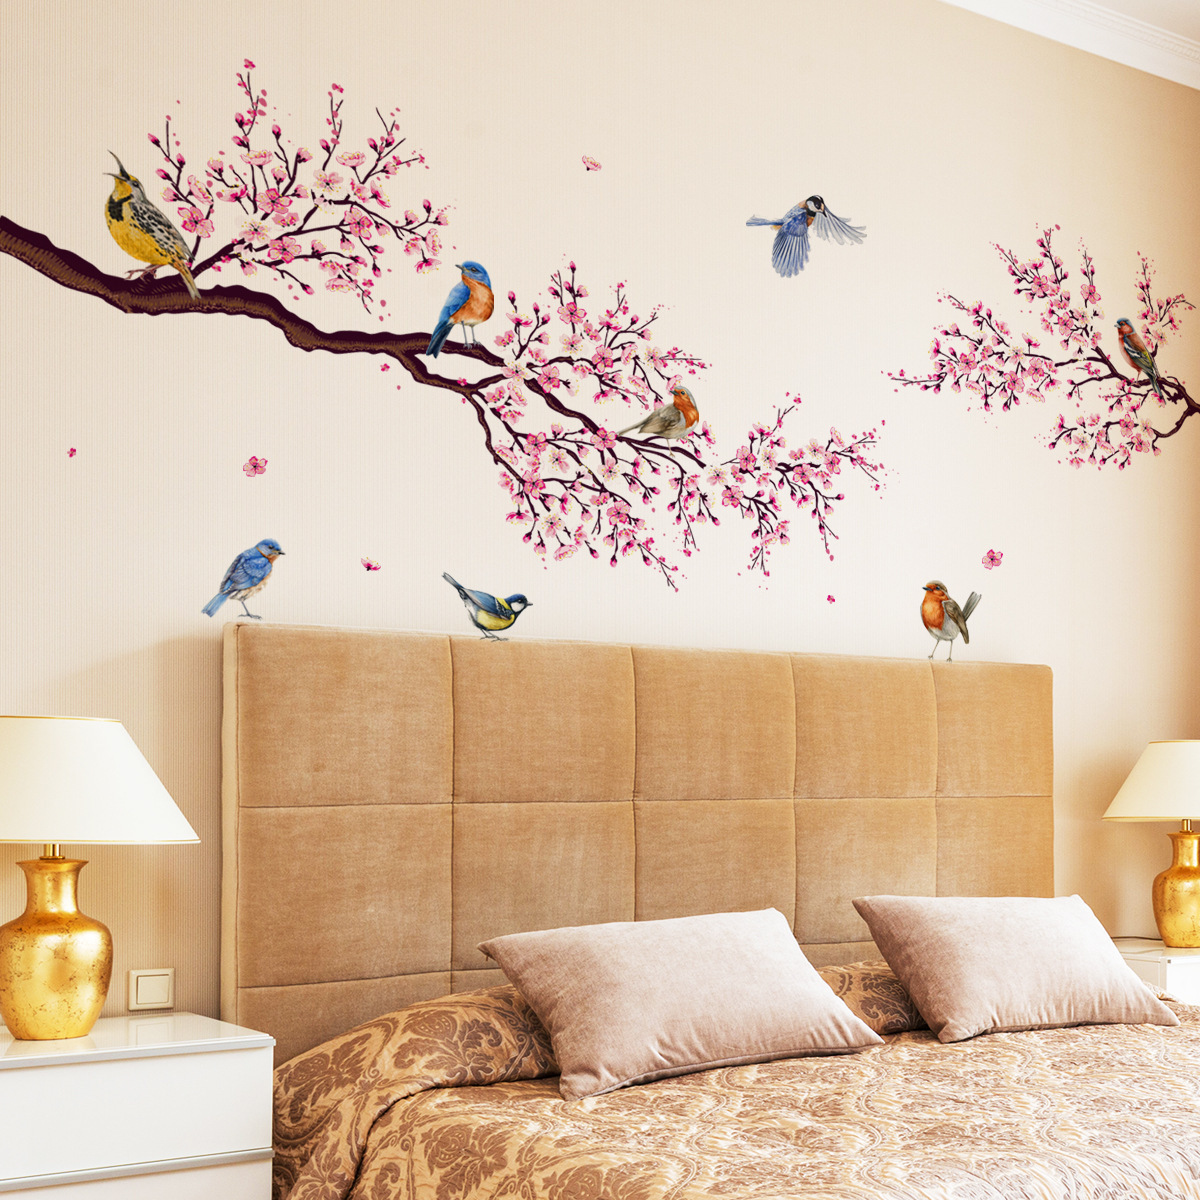 Flower Wall Decals Room Removable Self Adhesive Vinyl Wall Stickers